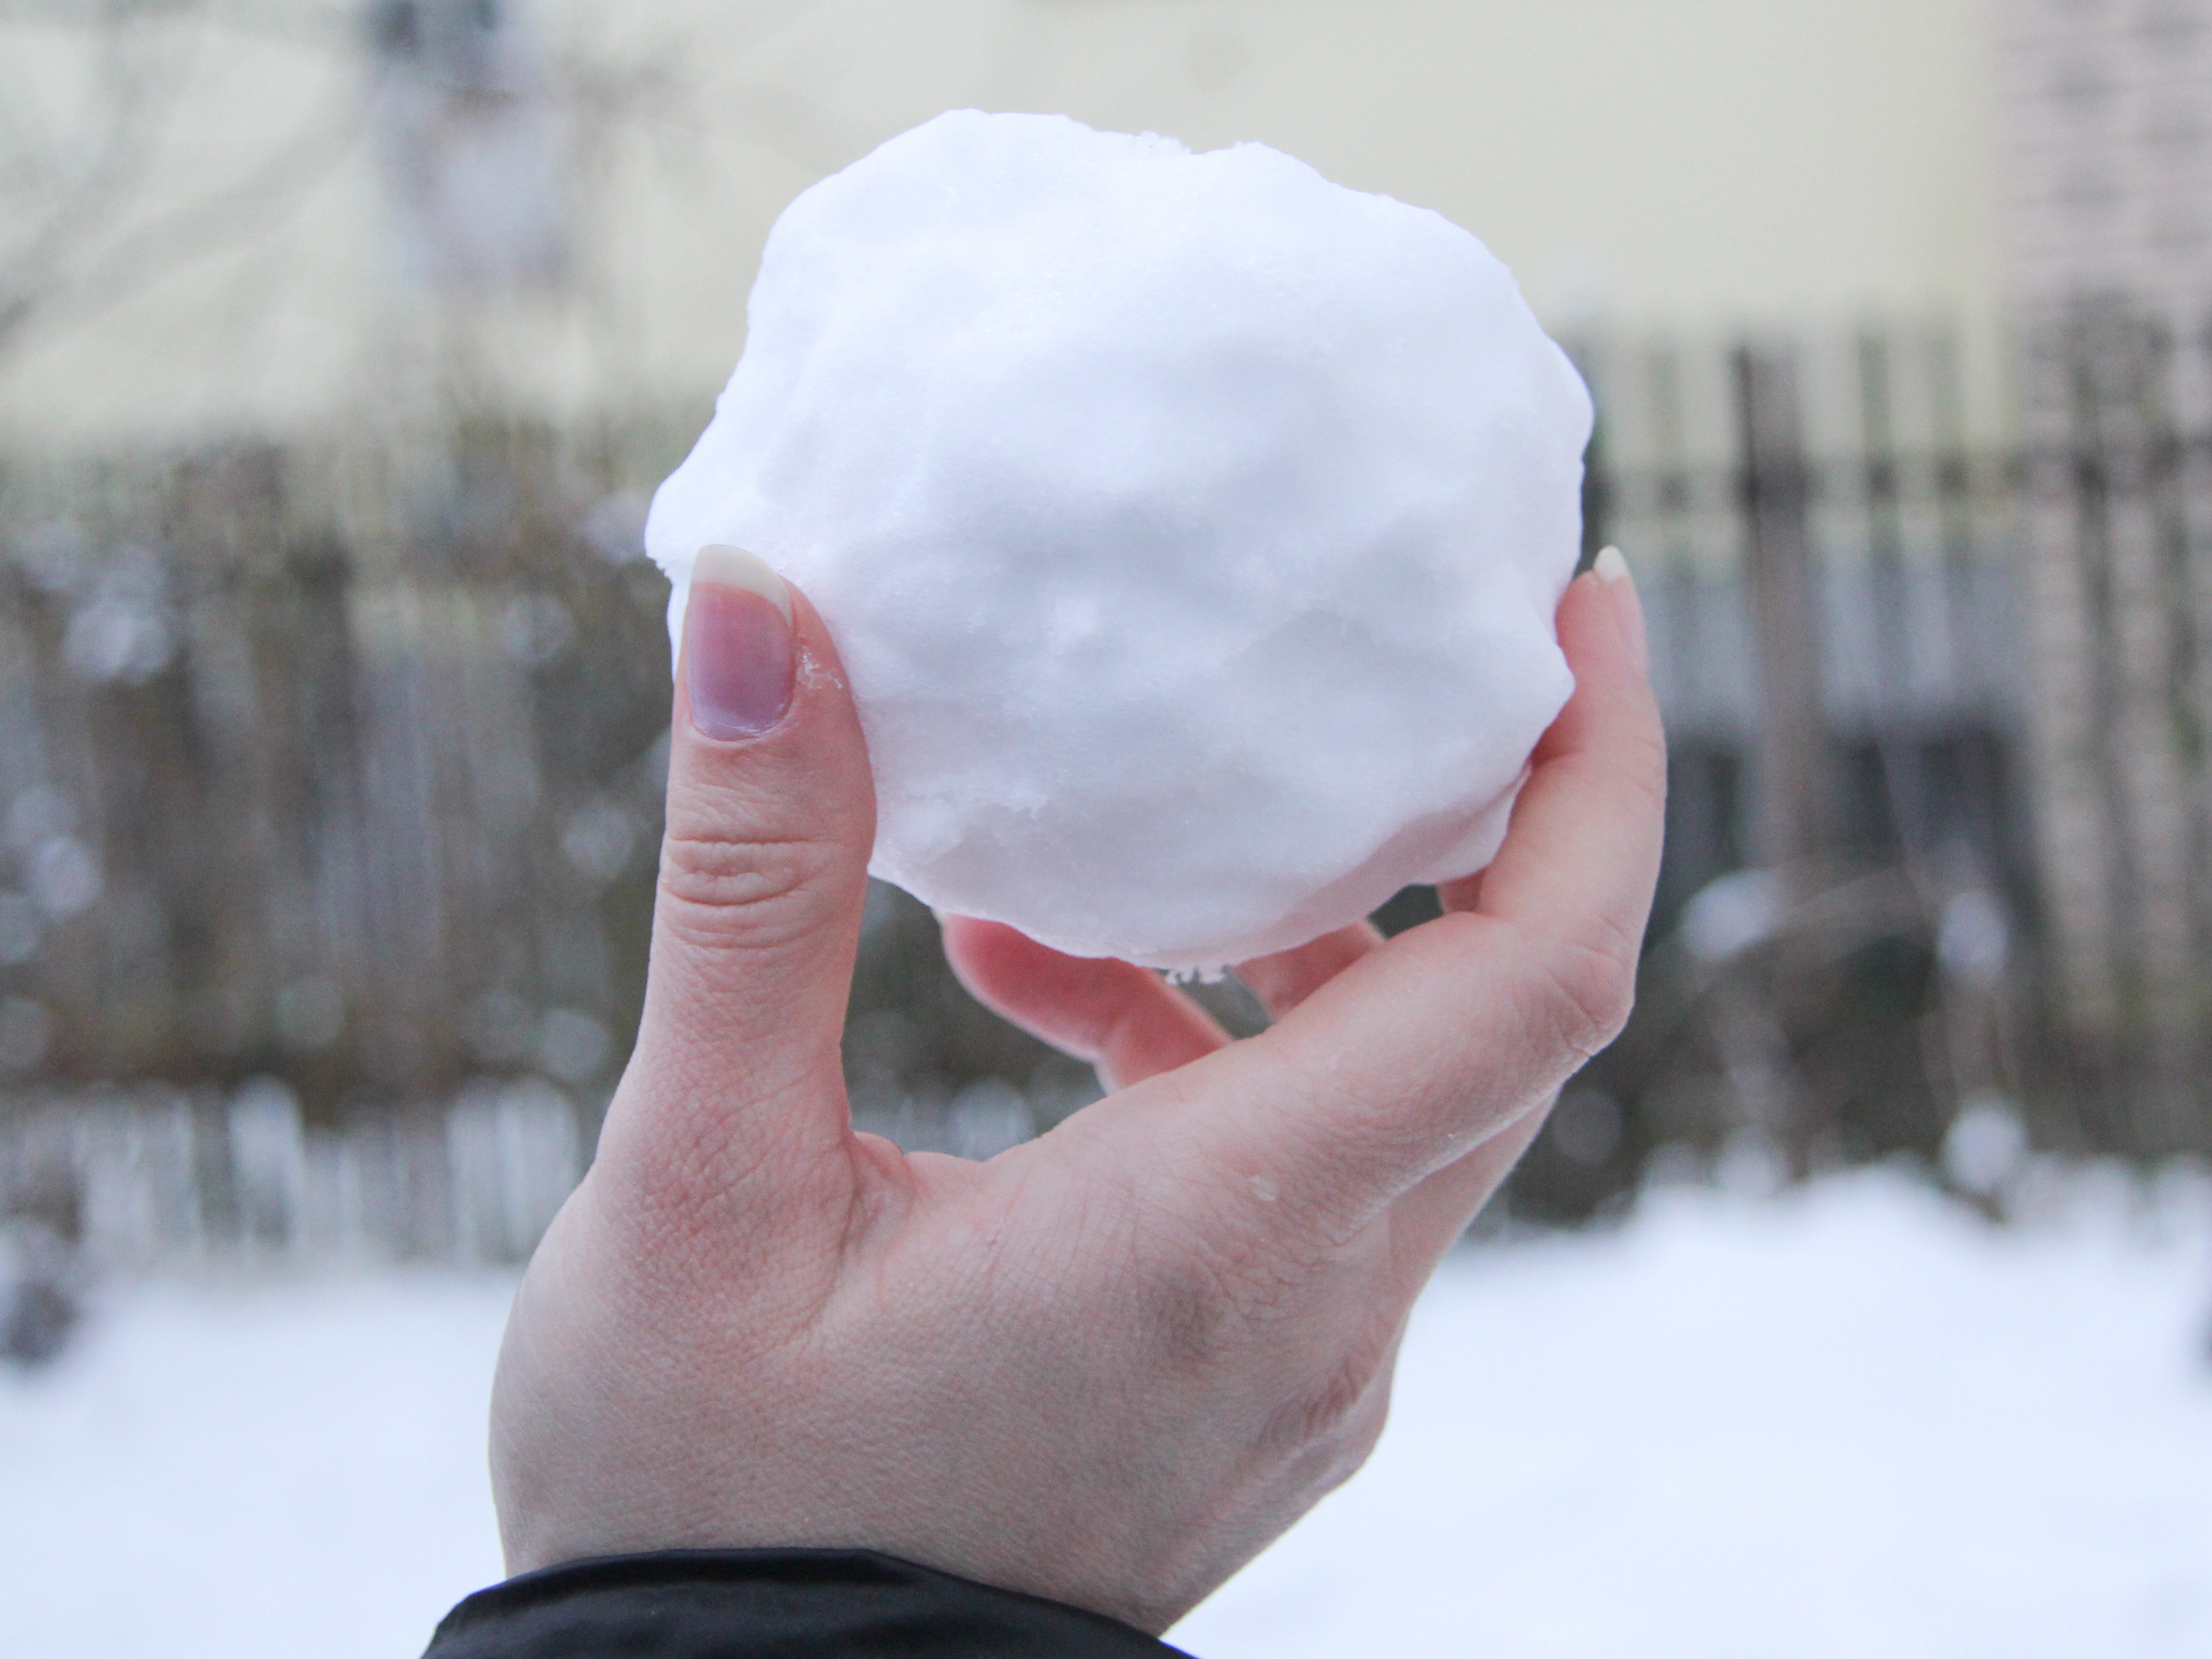 3 Ways to Make a Snowball - wikiHow